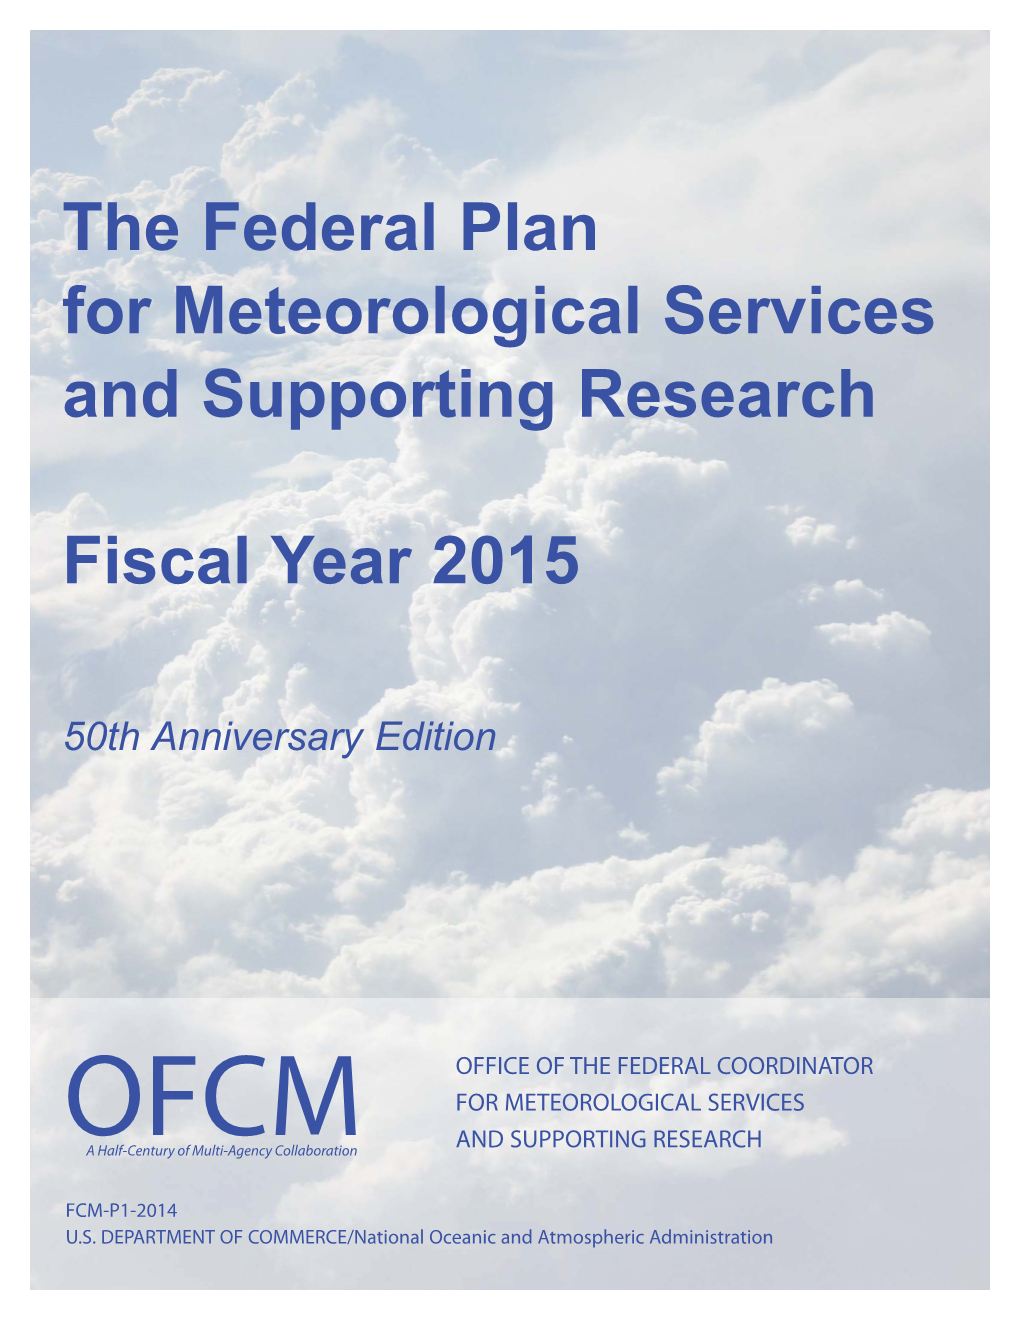 The Federal Plan for Meteorological Services and Supporting Research